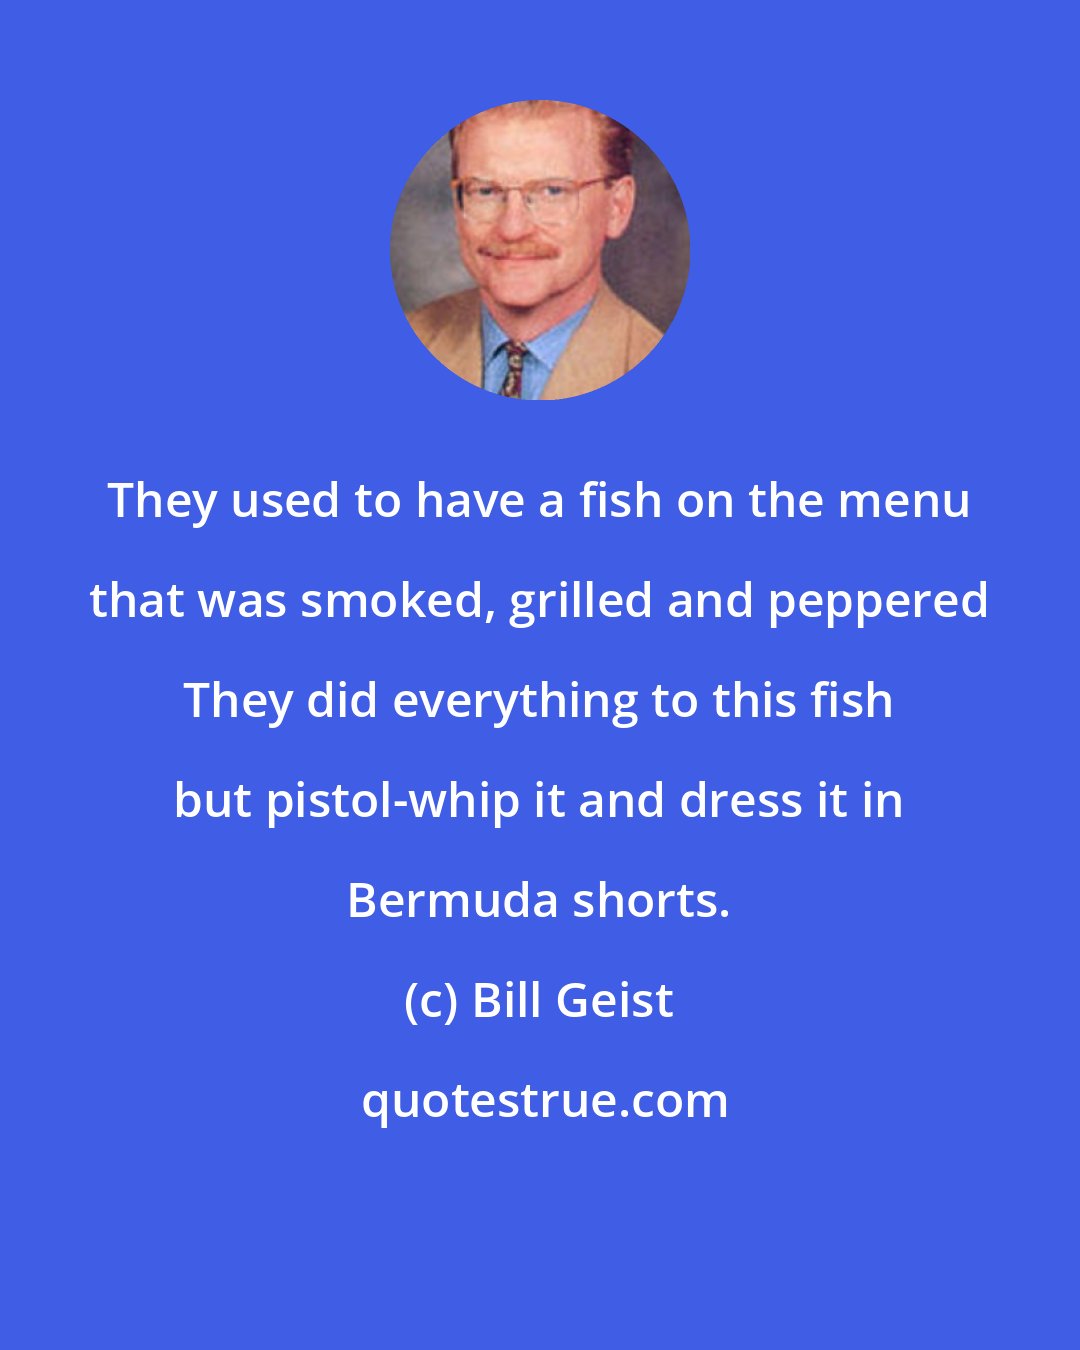 Bill Geist: They used to have a fish on the menu that was smoked, grilled and peppered They did everything to this fish but pistol-whip it and dress it in Bermuda shorts.